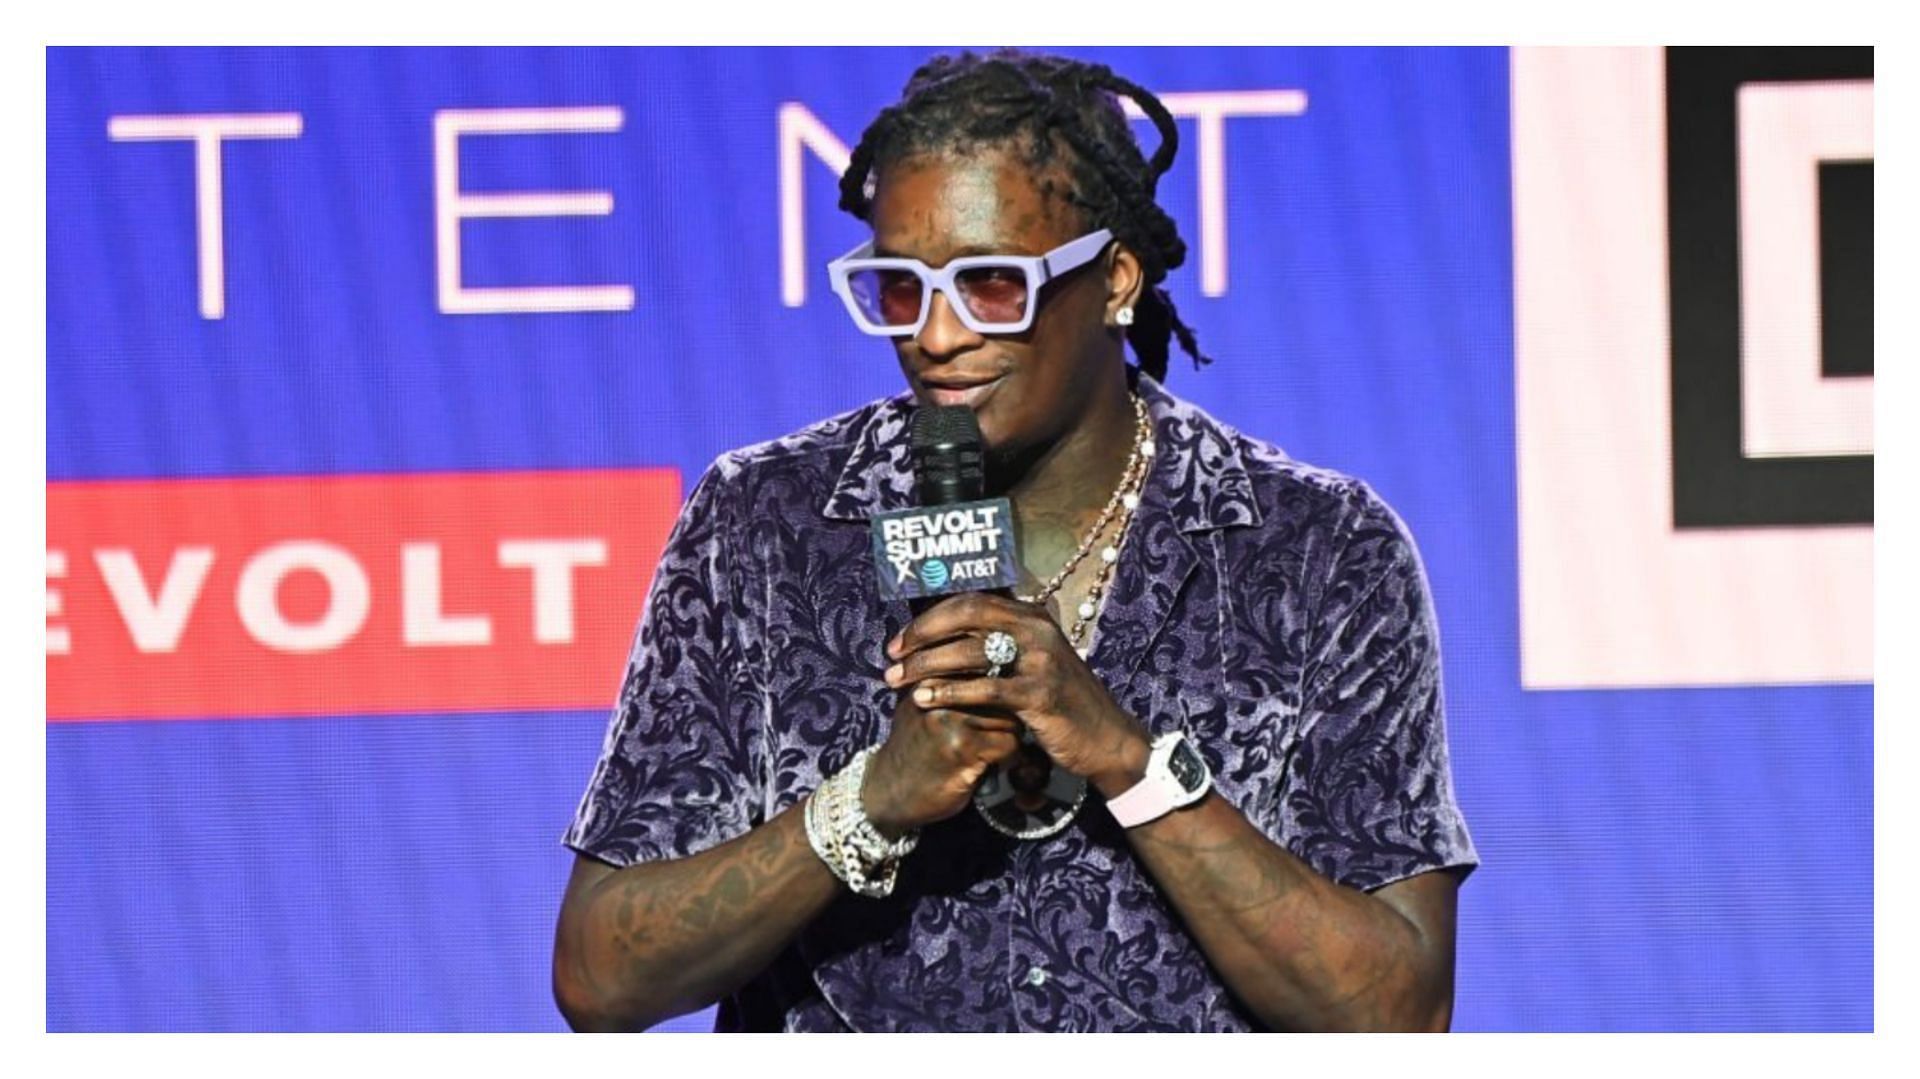 Young Thug participated in the hearing from jail through video call (Image via Paras Griffin/Getty Images)